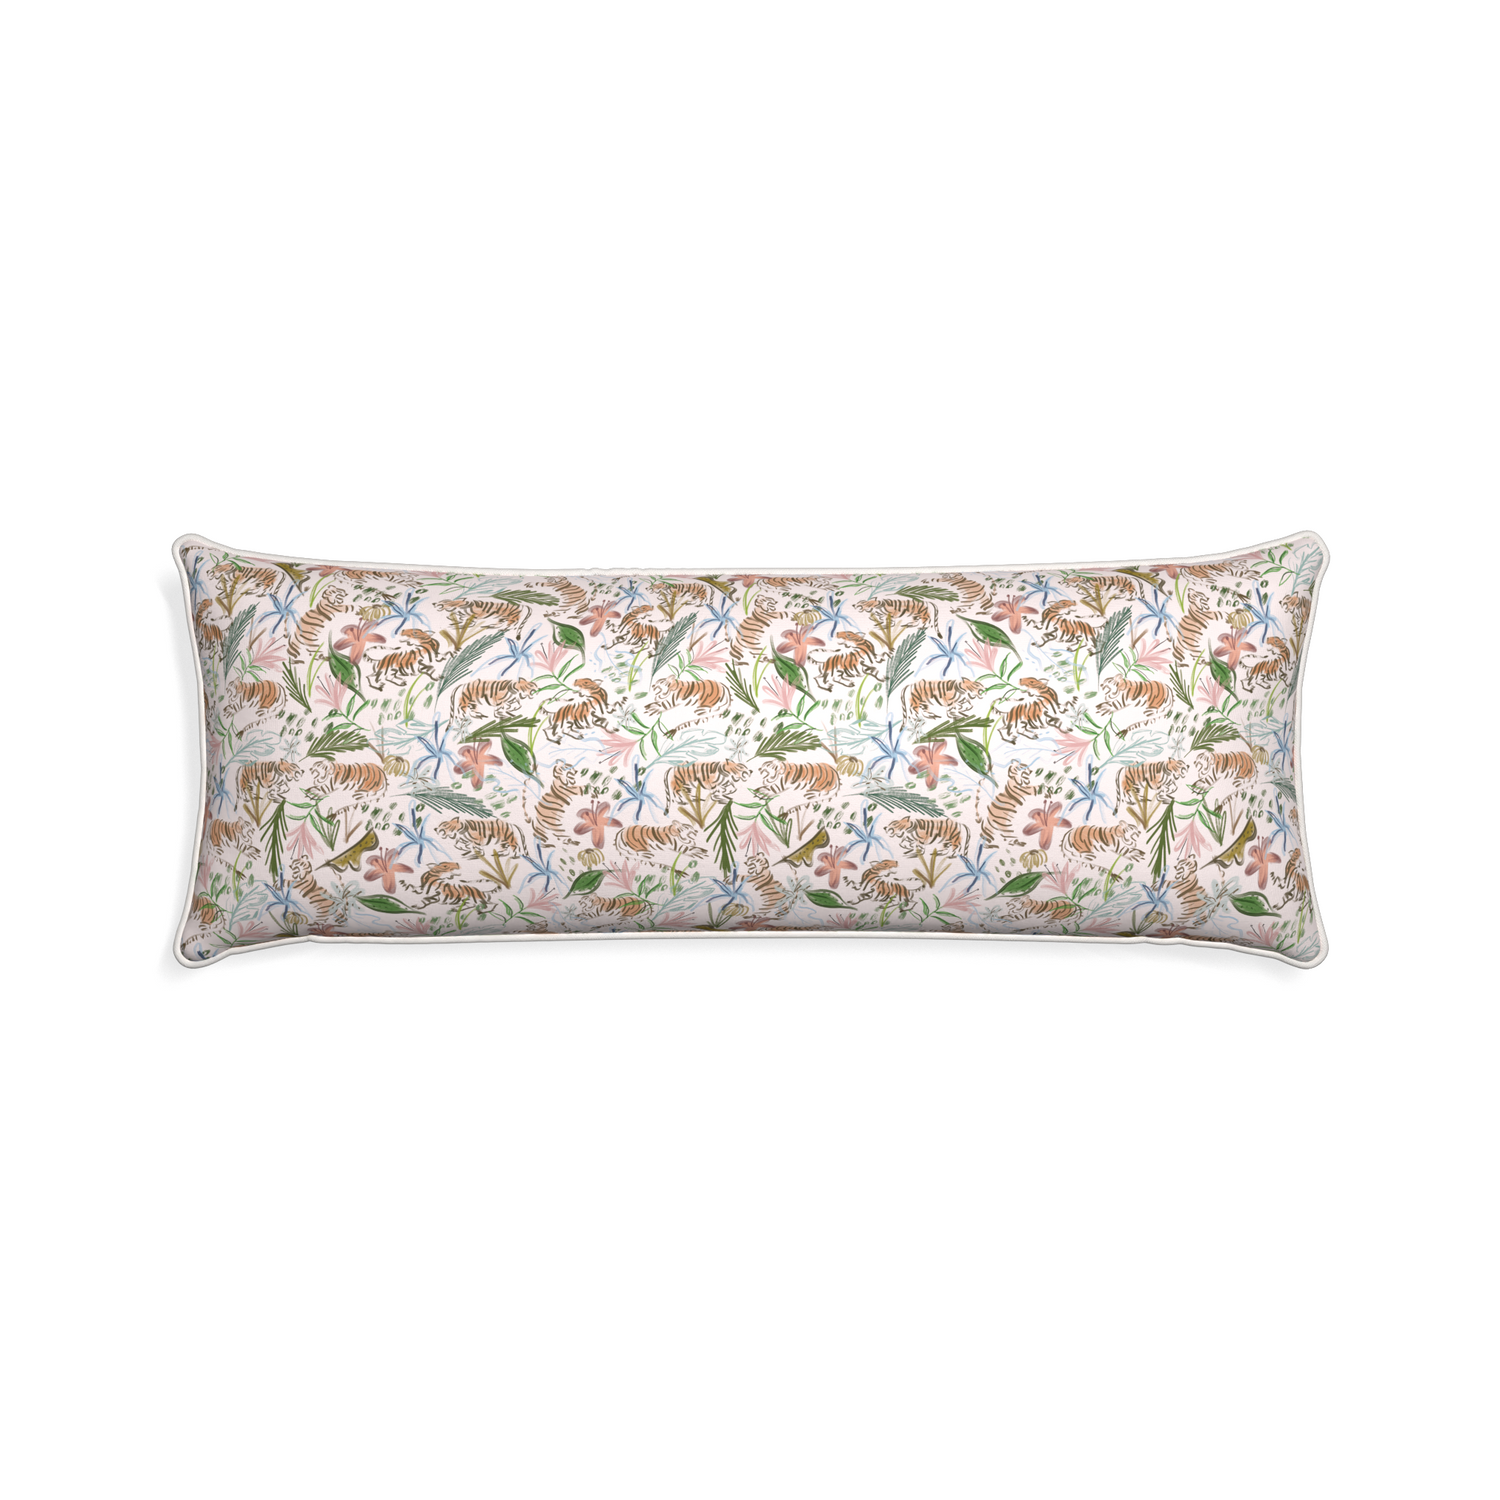 Xl-lumbar frida pink custom pink chinoiserie tigerpillow with snow piping on white background